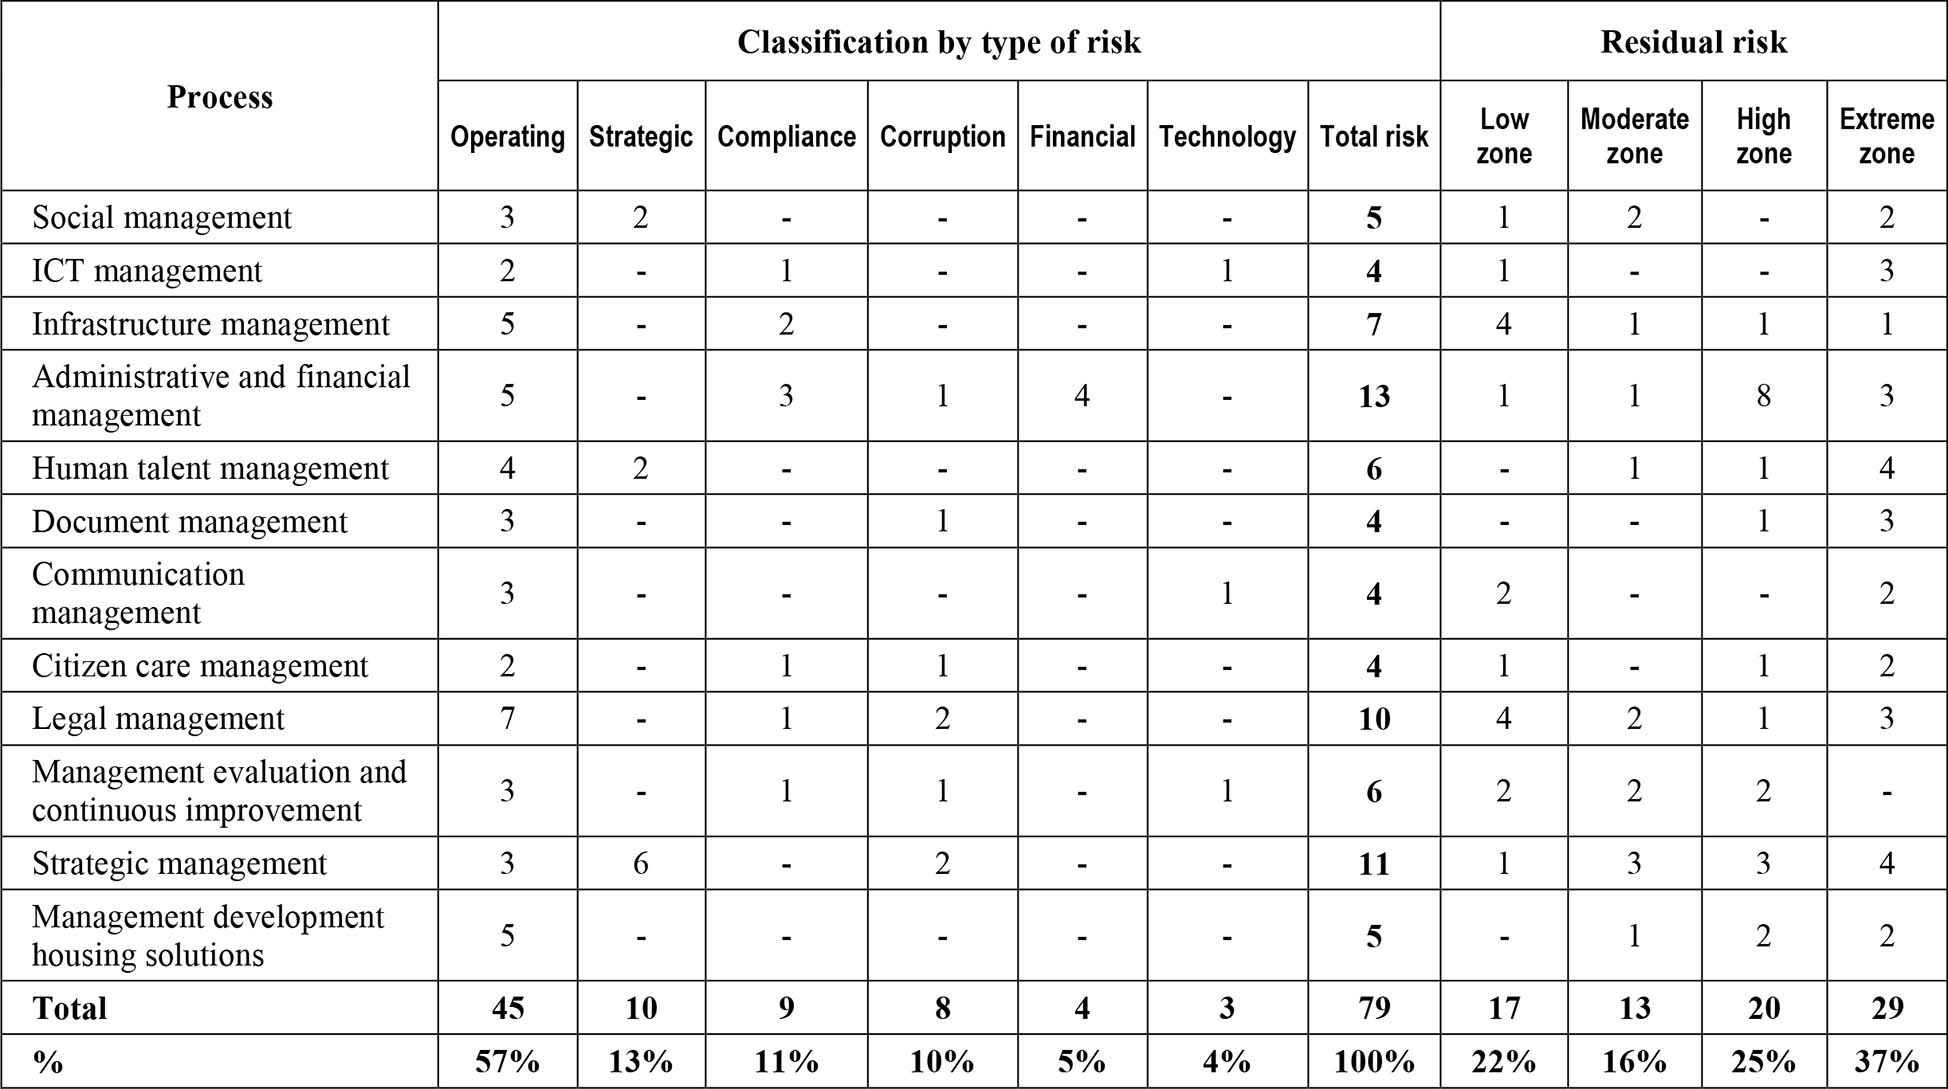 Results of the risk evaluation